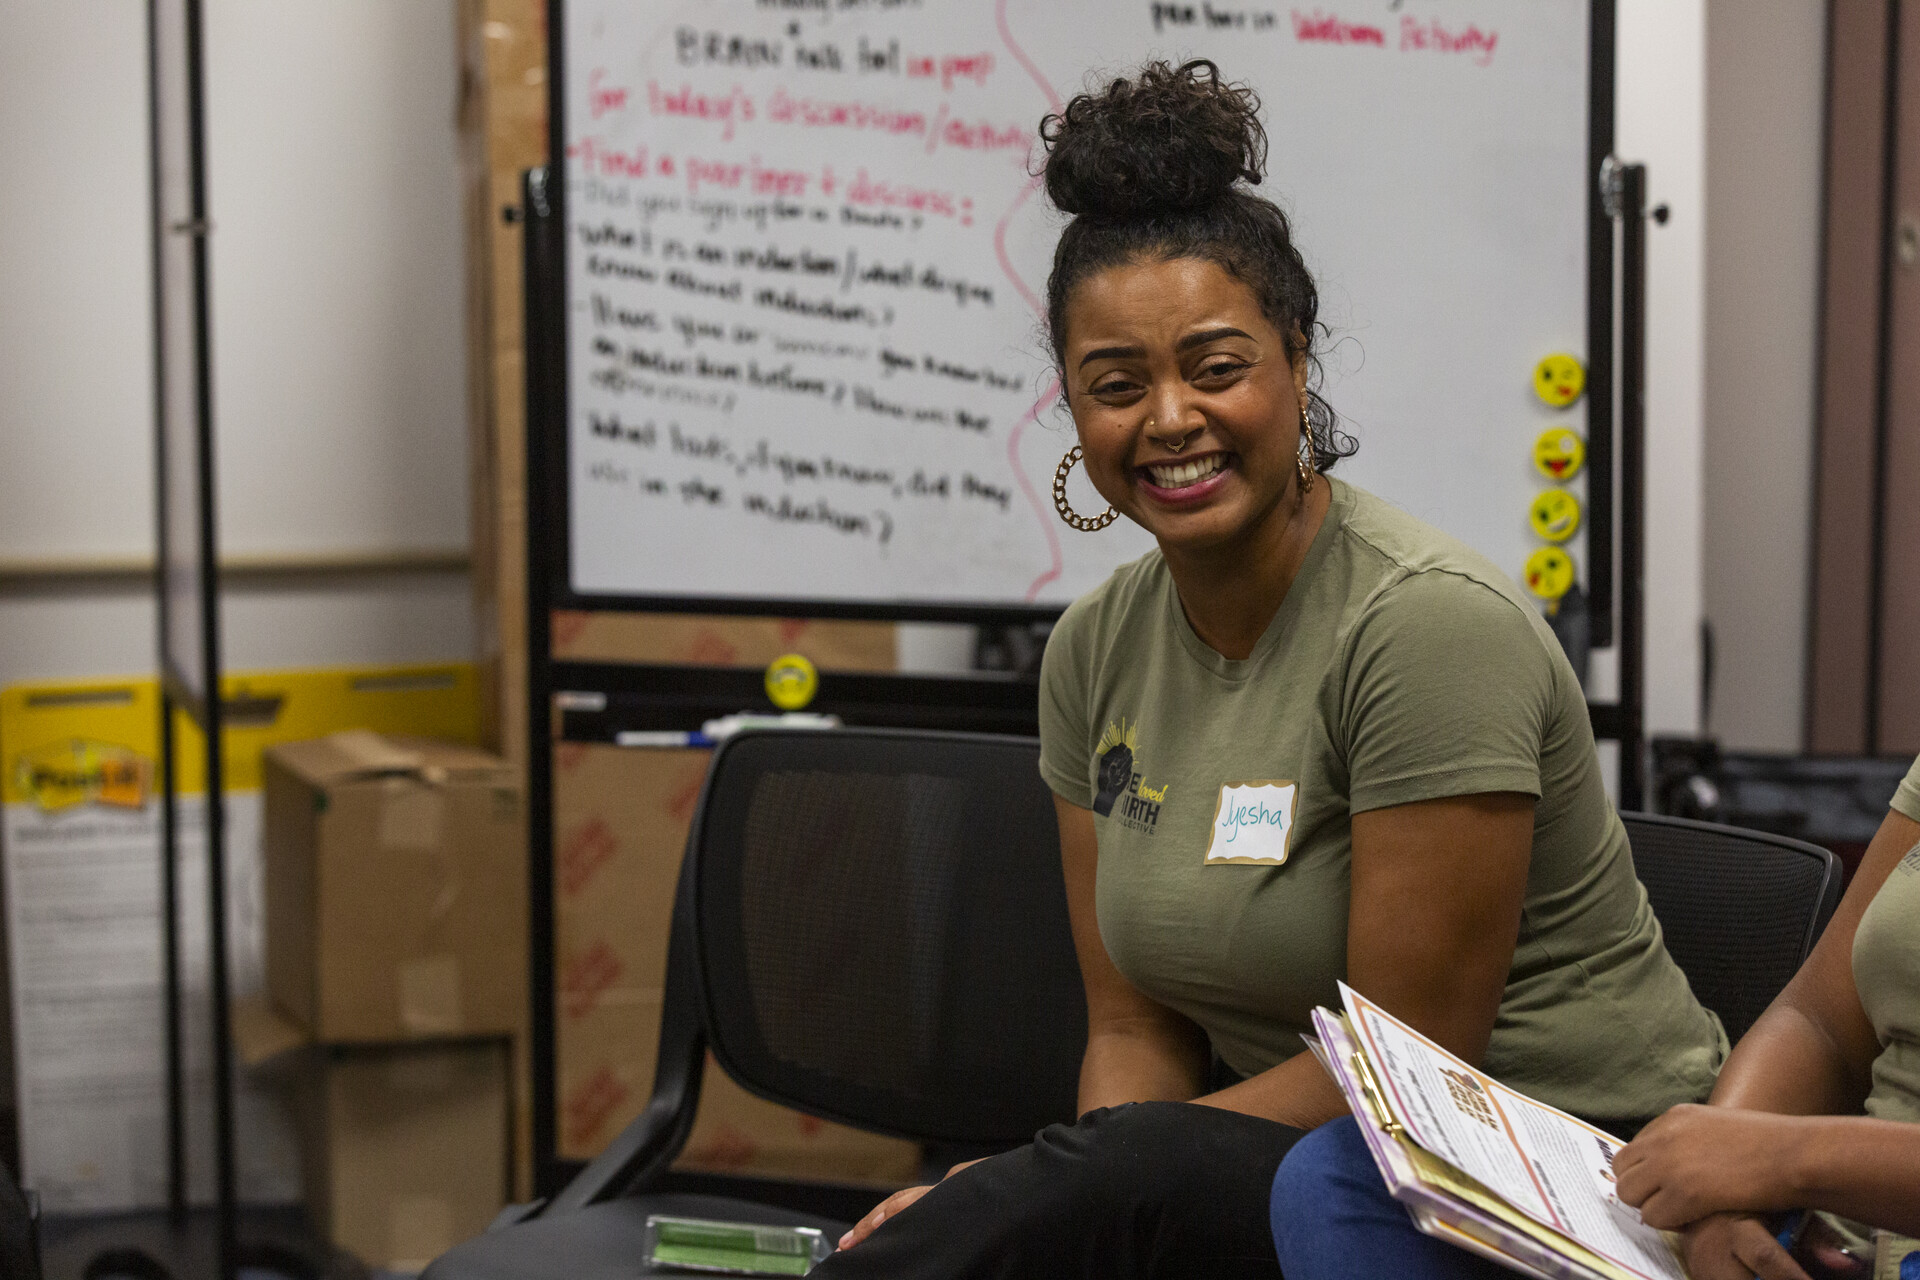 An African American woman smiles as she sits in front of a whiteboard with writing on it.